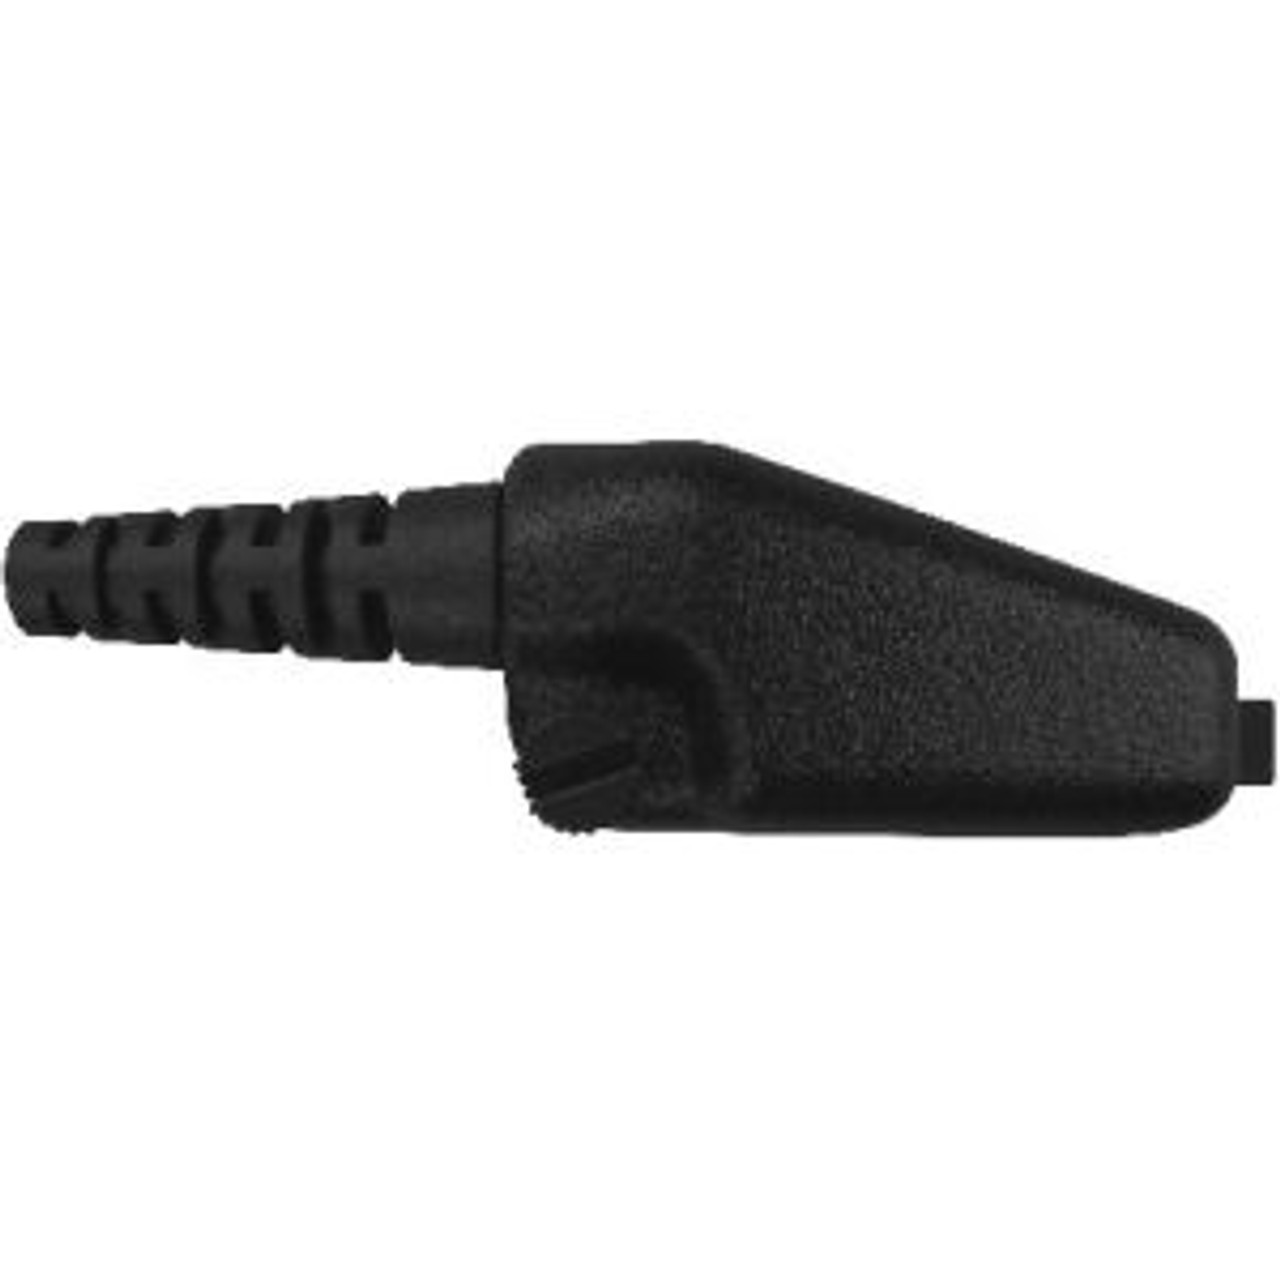 Otto ClearTrak NRX Behind The Head Double Muff Headset For Kenwood TK-5210